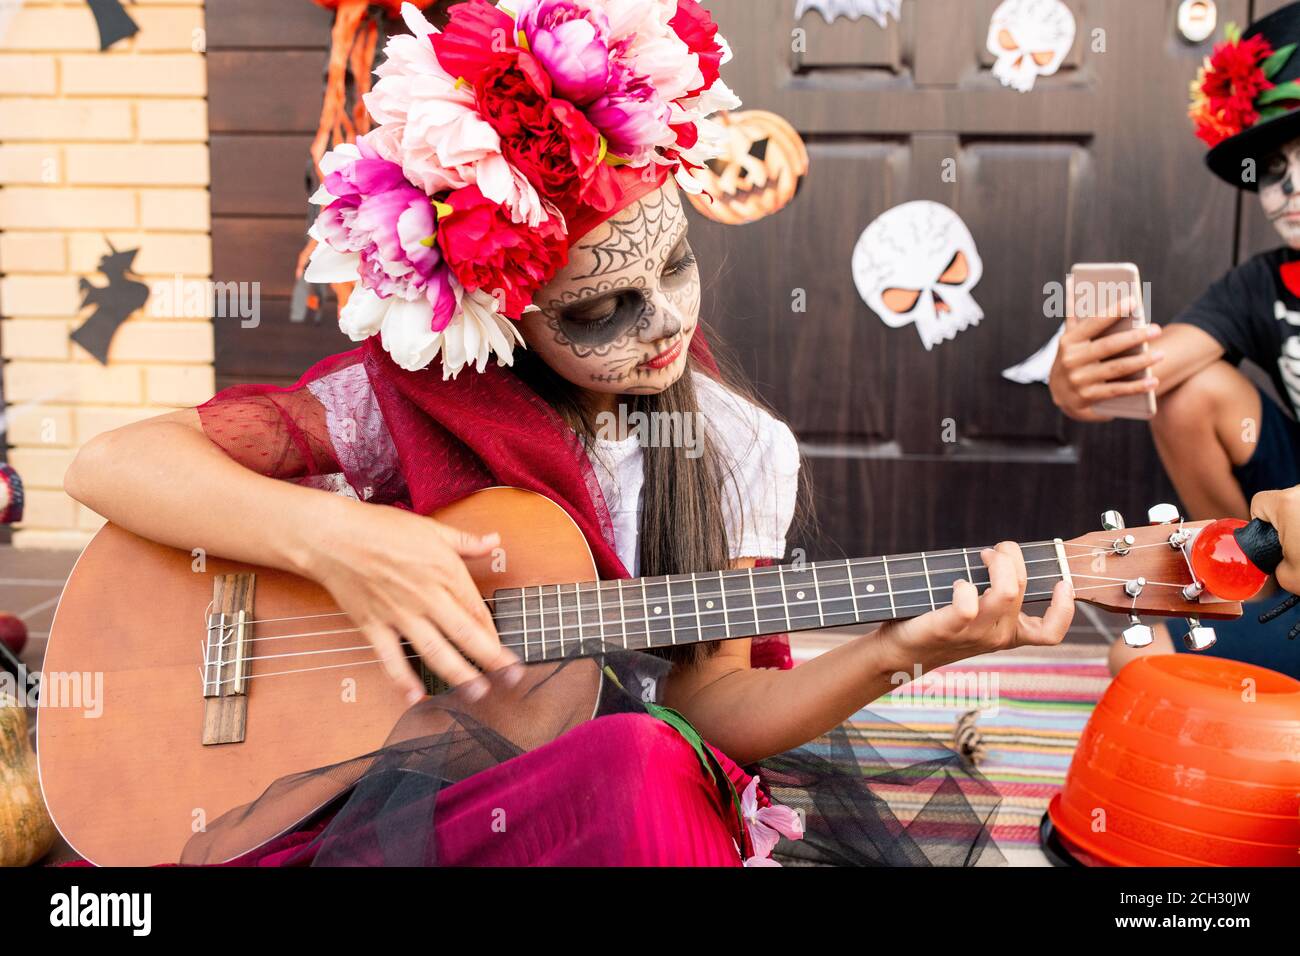 Cute little girl in halloween costume sitting on staircase and playing guitar Stock Photo